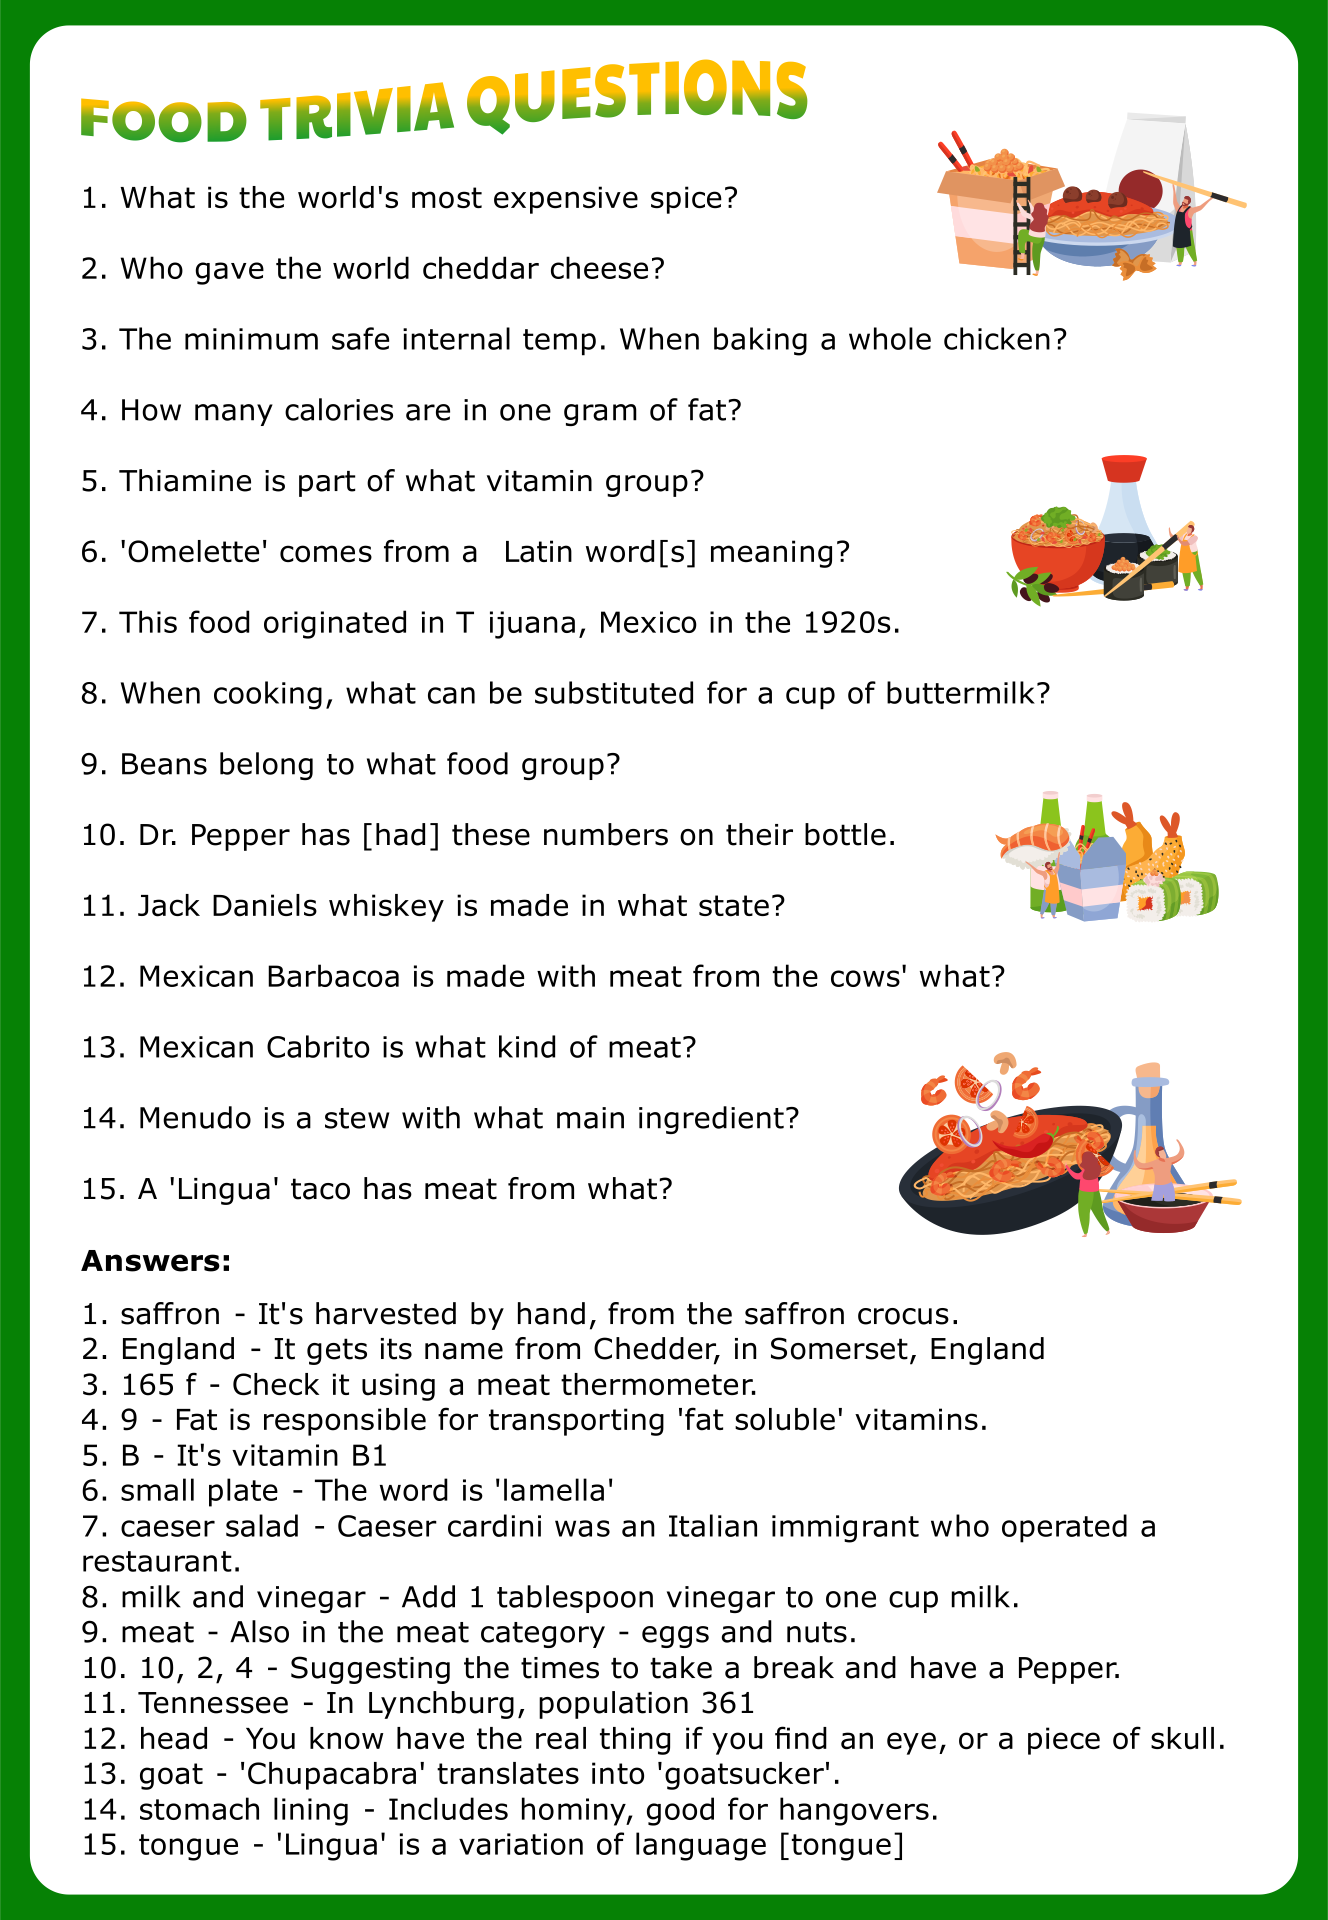 nutrition-quiz-questions-and-answers-for-elementary-bios-pics